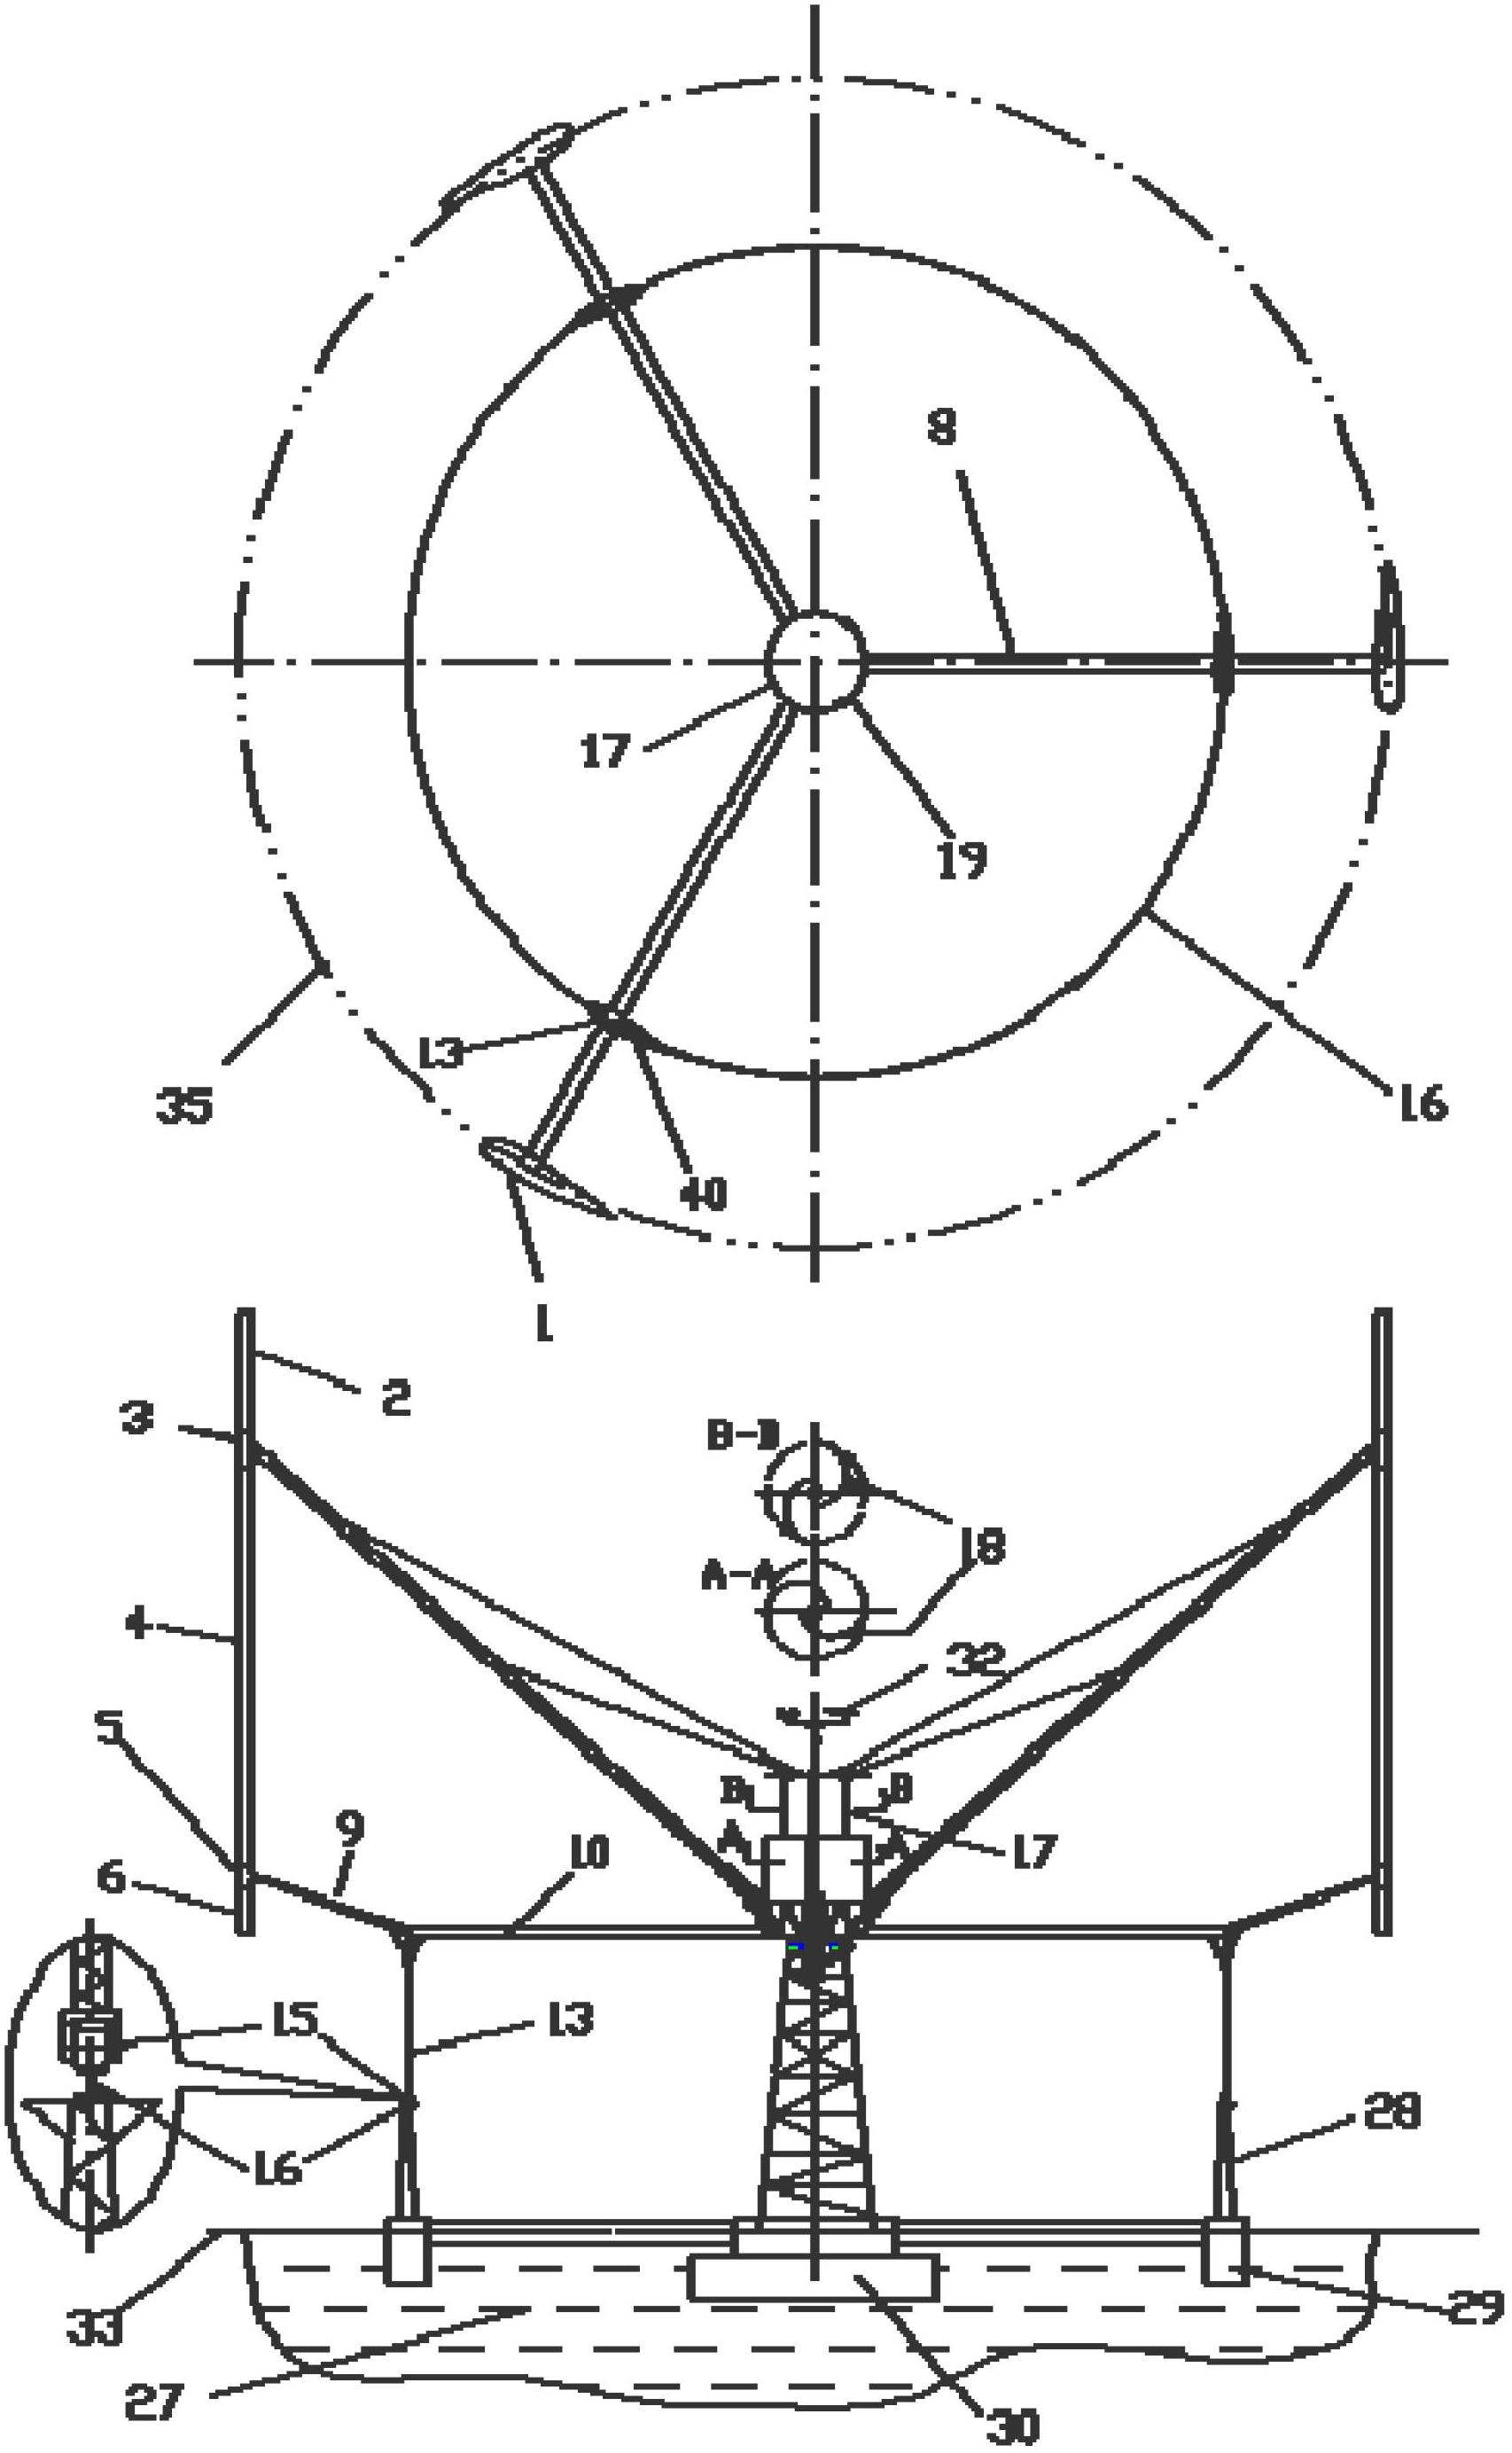 Movable wing-type lifting high-power vertical axis wind turbine